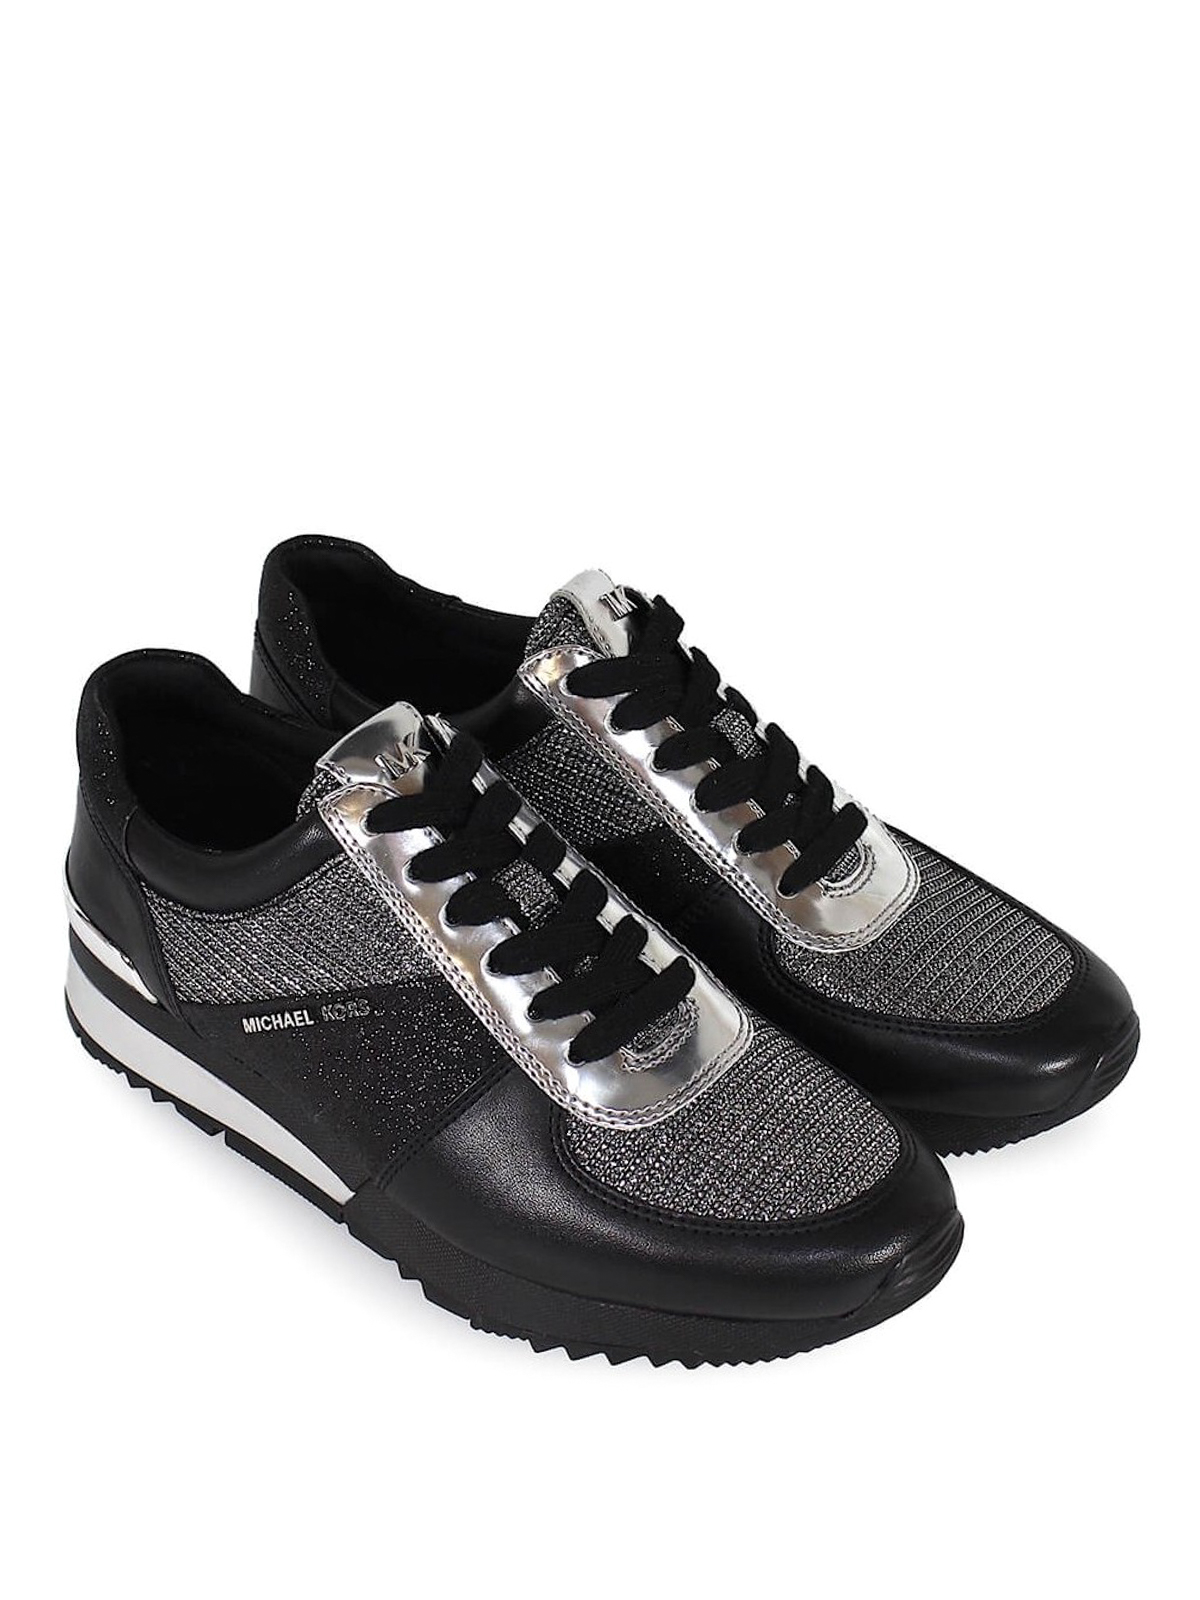 Trainers Michael Kors - Allie black leather and silver sneakers - 43T8ALFS2D023